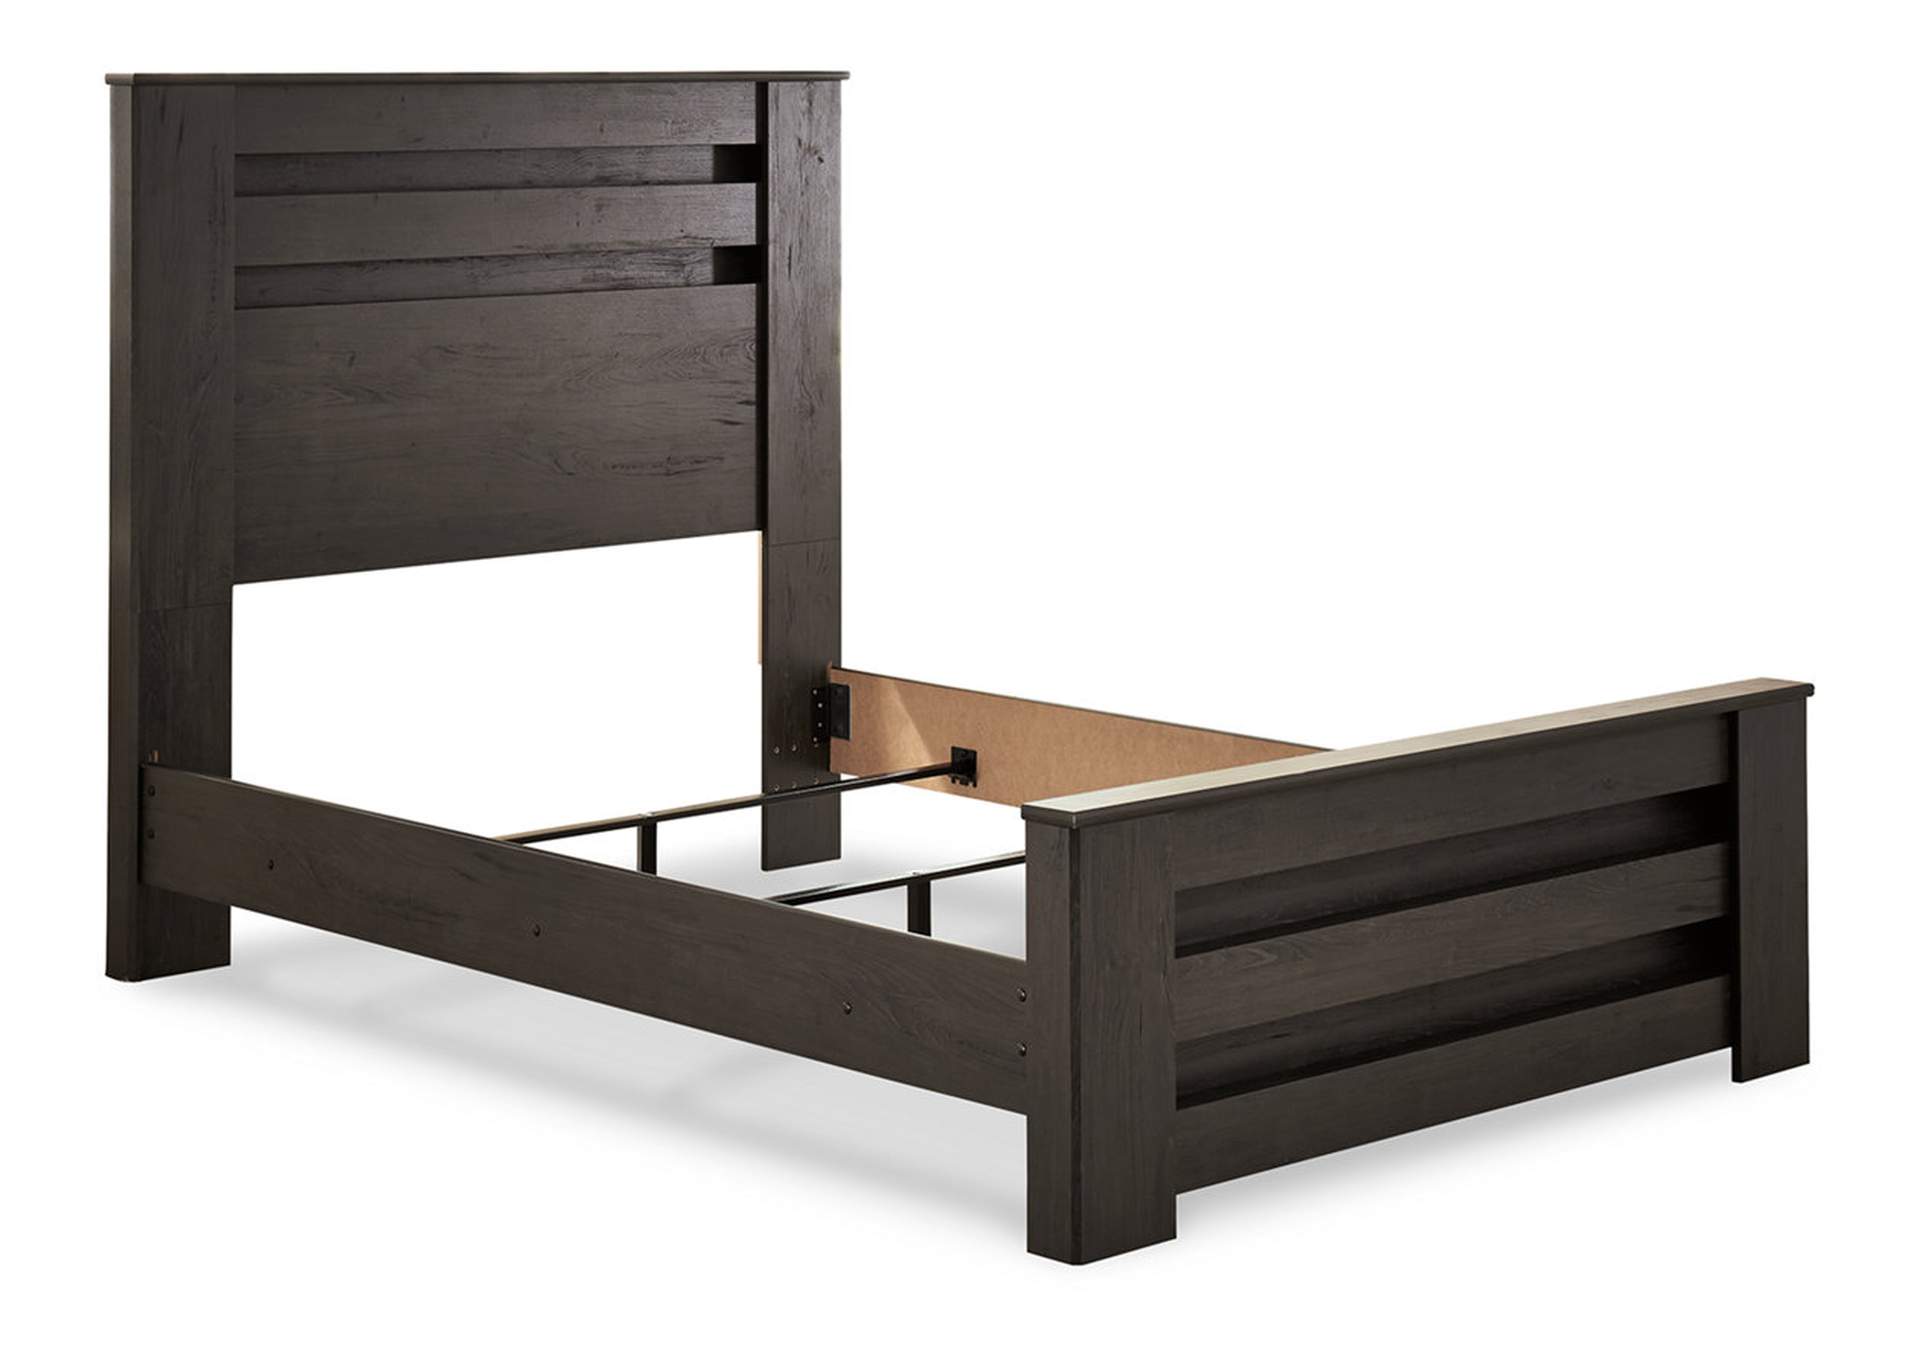 Brinxton Full Panel Bed,Signature Design By Ashley